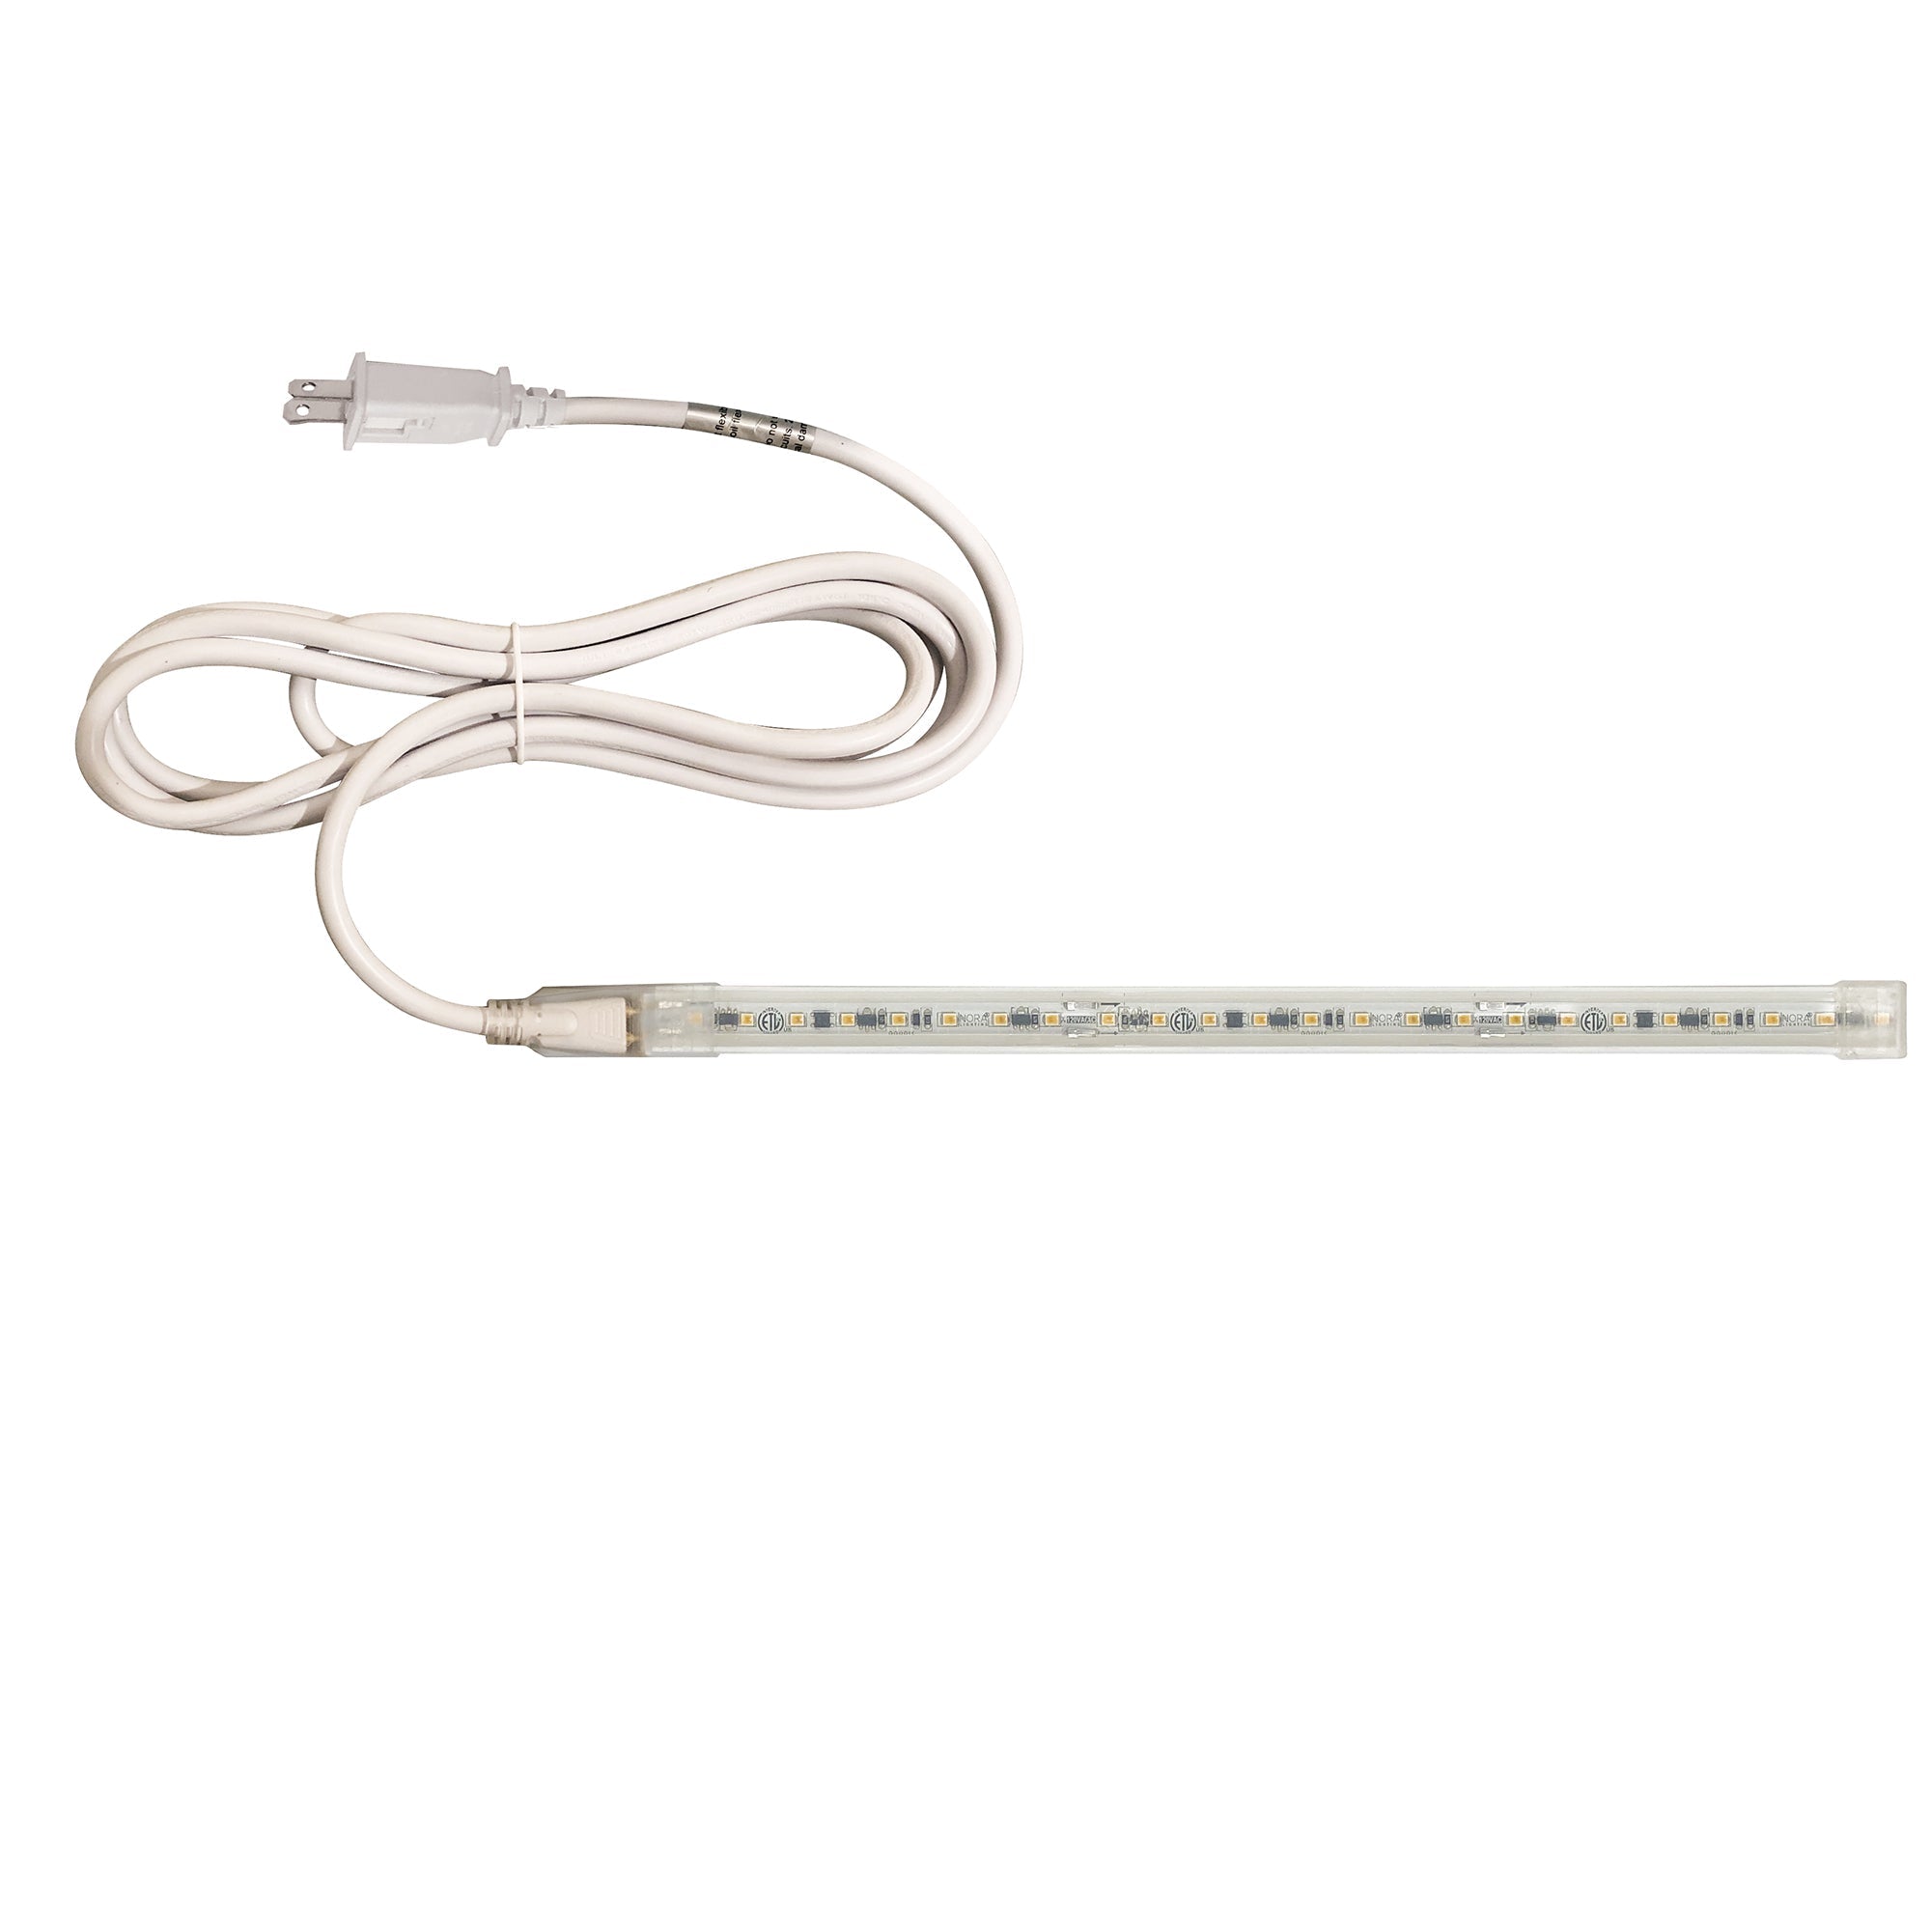 Nora Lighting NUTP13-W5-8-12-927/CP - Accent / Undercabinet - Custom Cut 5-ft, 8-in 120V Continuous LED Tape Light, 330lm / 3.6W per foot, 2700K, w/ Mounting Clips and 8' Cord & Plug